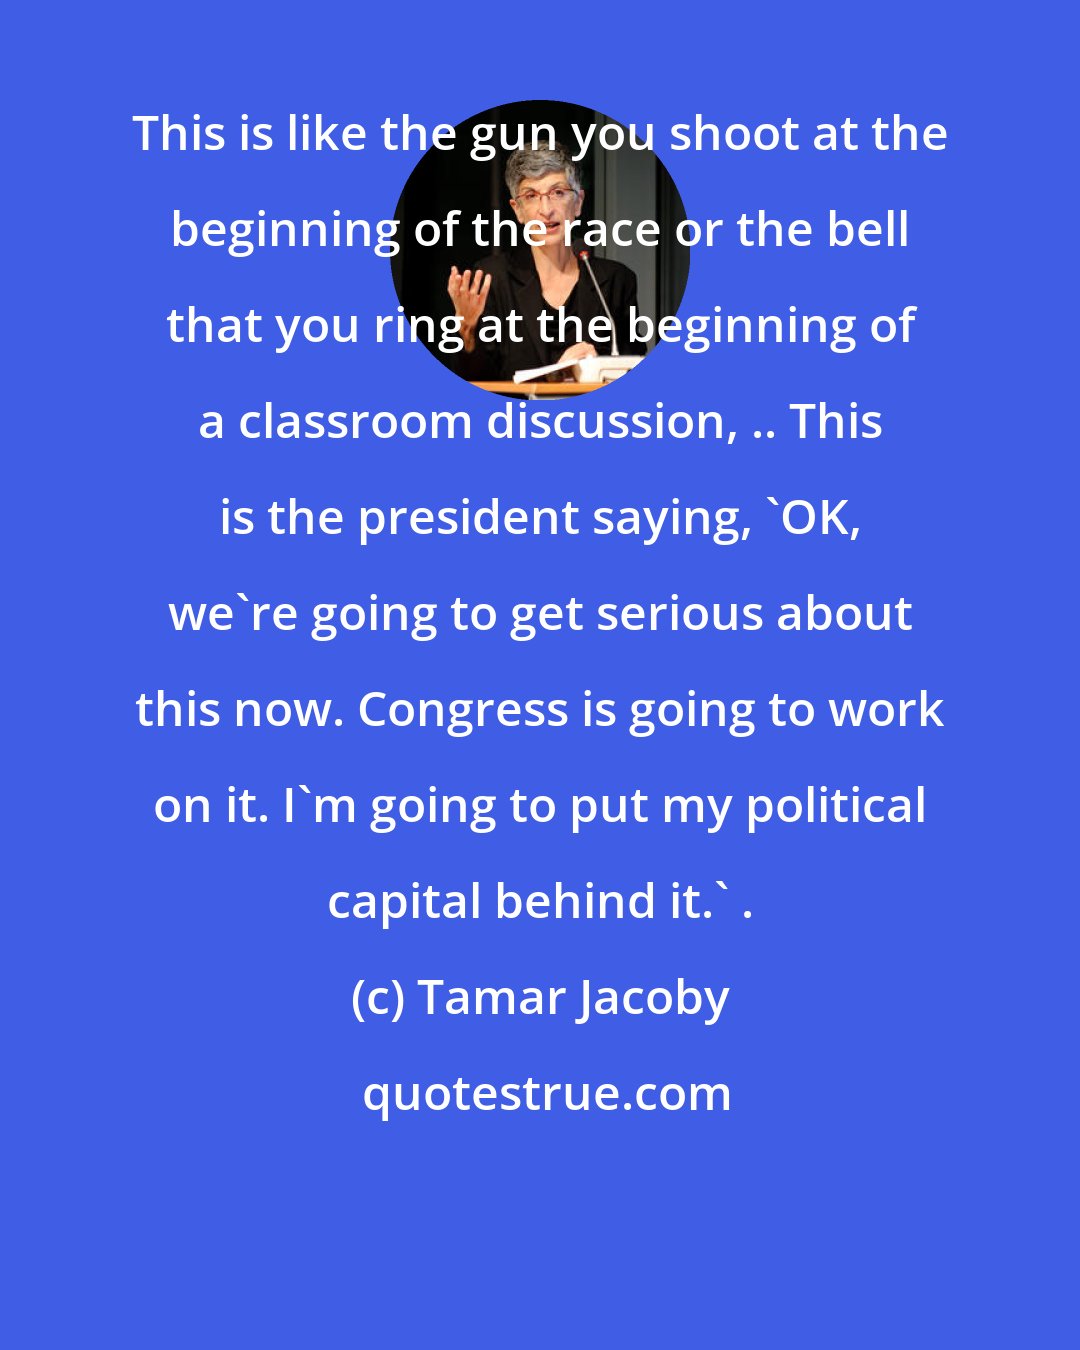 Tamar Jacoby: This is like the gun you shoot at the beginning of the race or the bell that you ring at the beginning of a classroom discussion, .. This is the president saying, 'OK, we're going to get serious about this now. Congress is going to work on it. I'm going to put my political capital behind it.' .